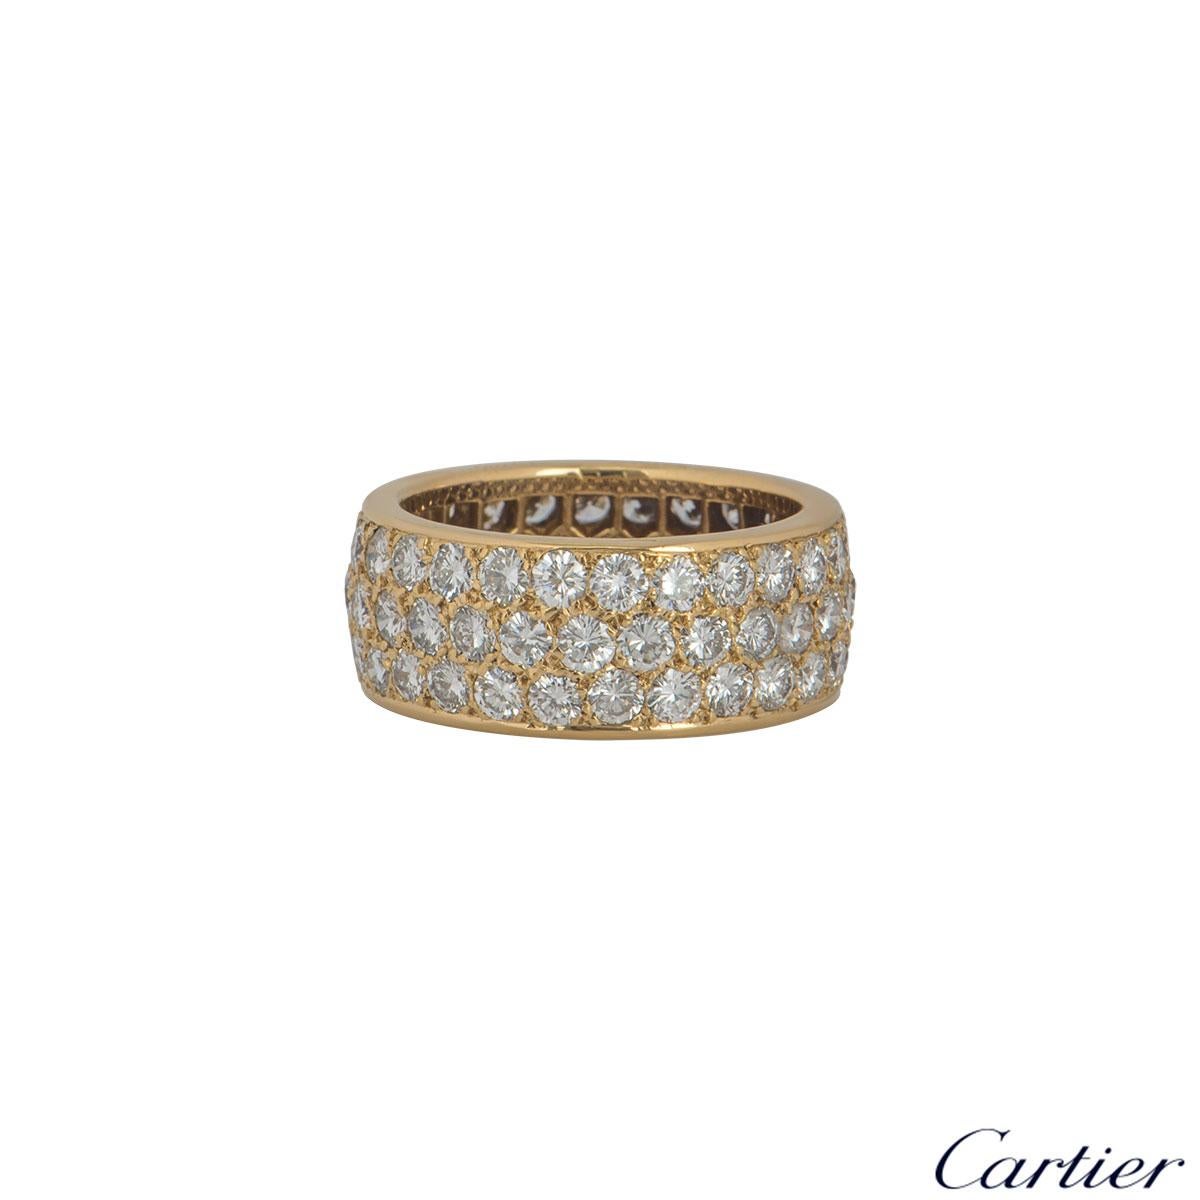 An elegant 18k yellow gold pave set diamond full eternity ring by Cartier. The ring comprises of 72 round brilliant cut diamonds in a unique three row pave setting, with a total weight of approximately 3.60ct, G colour and VS in clarity. The ring